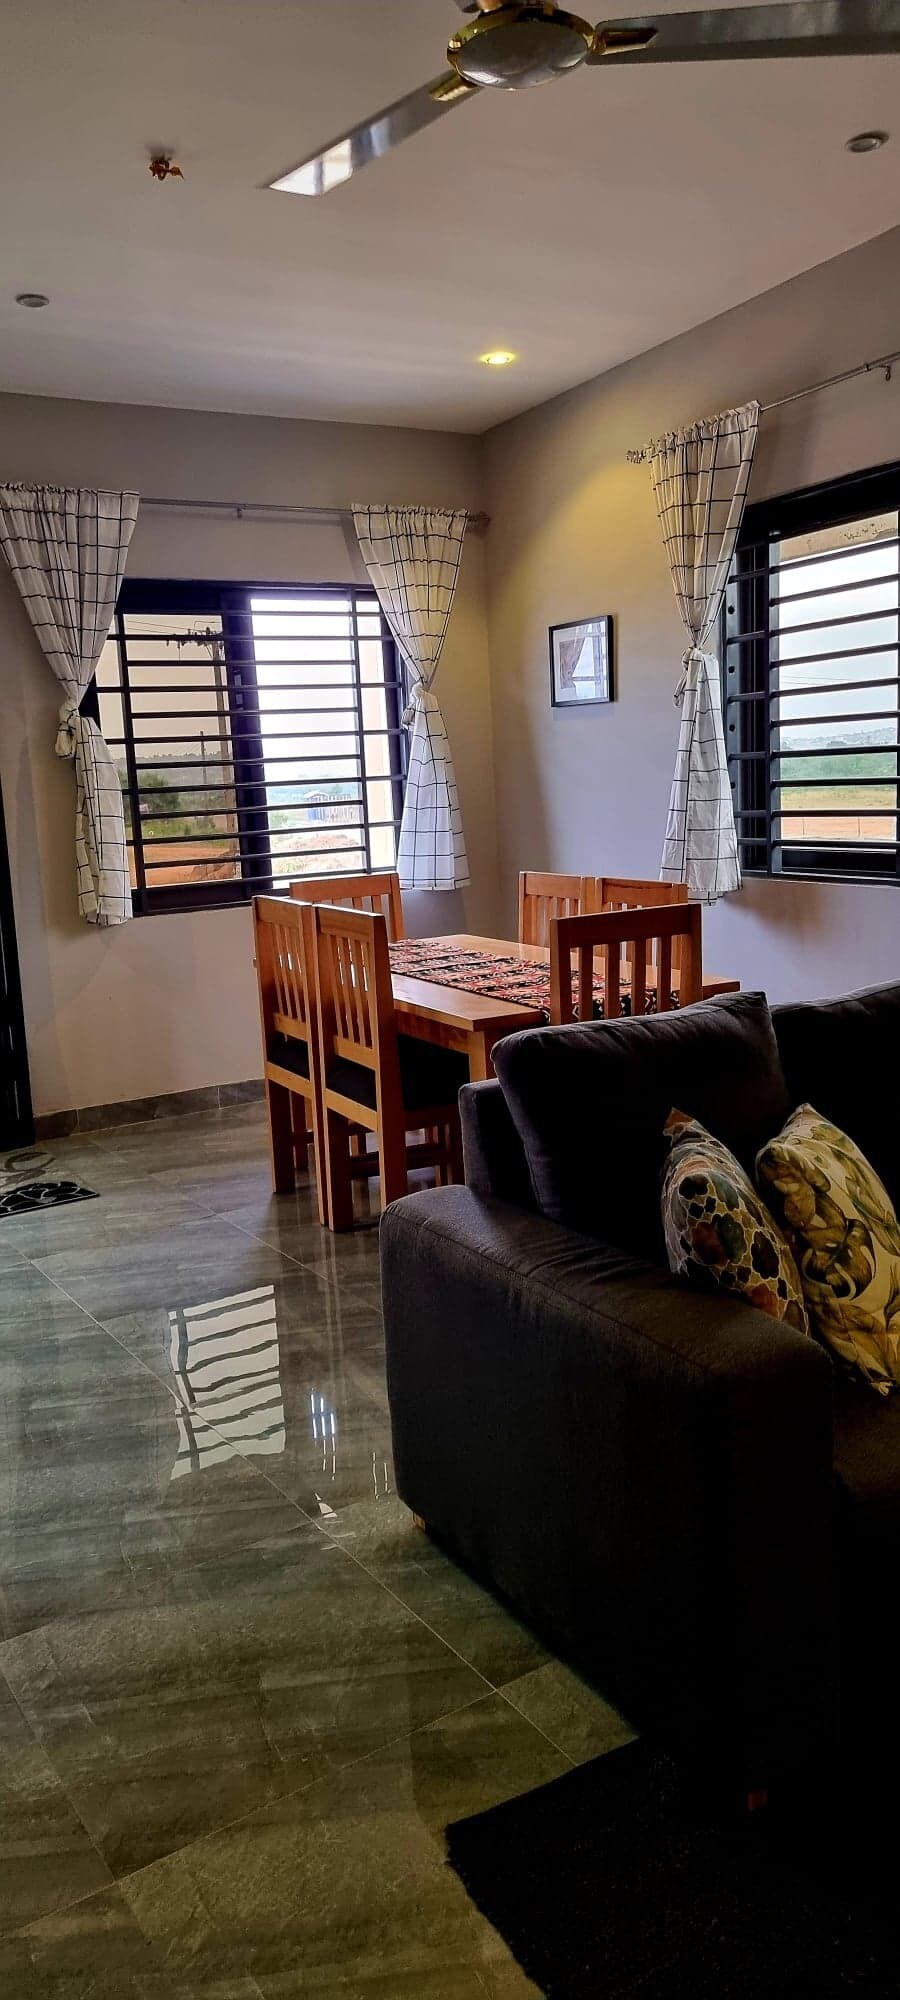 GEMTOM Airbnb Amasaman
Modern two bedroom house